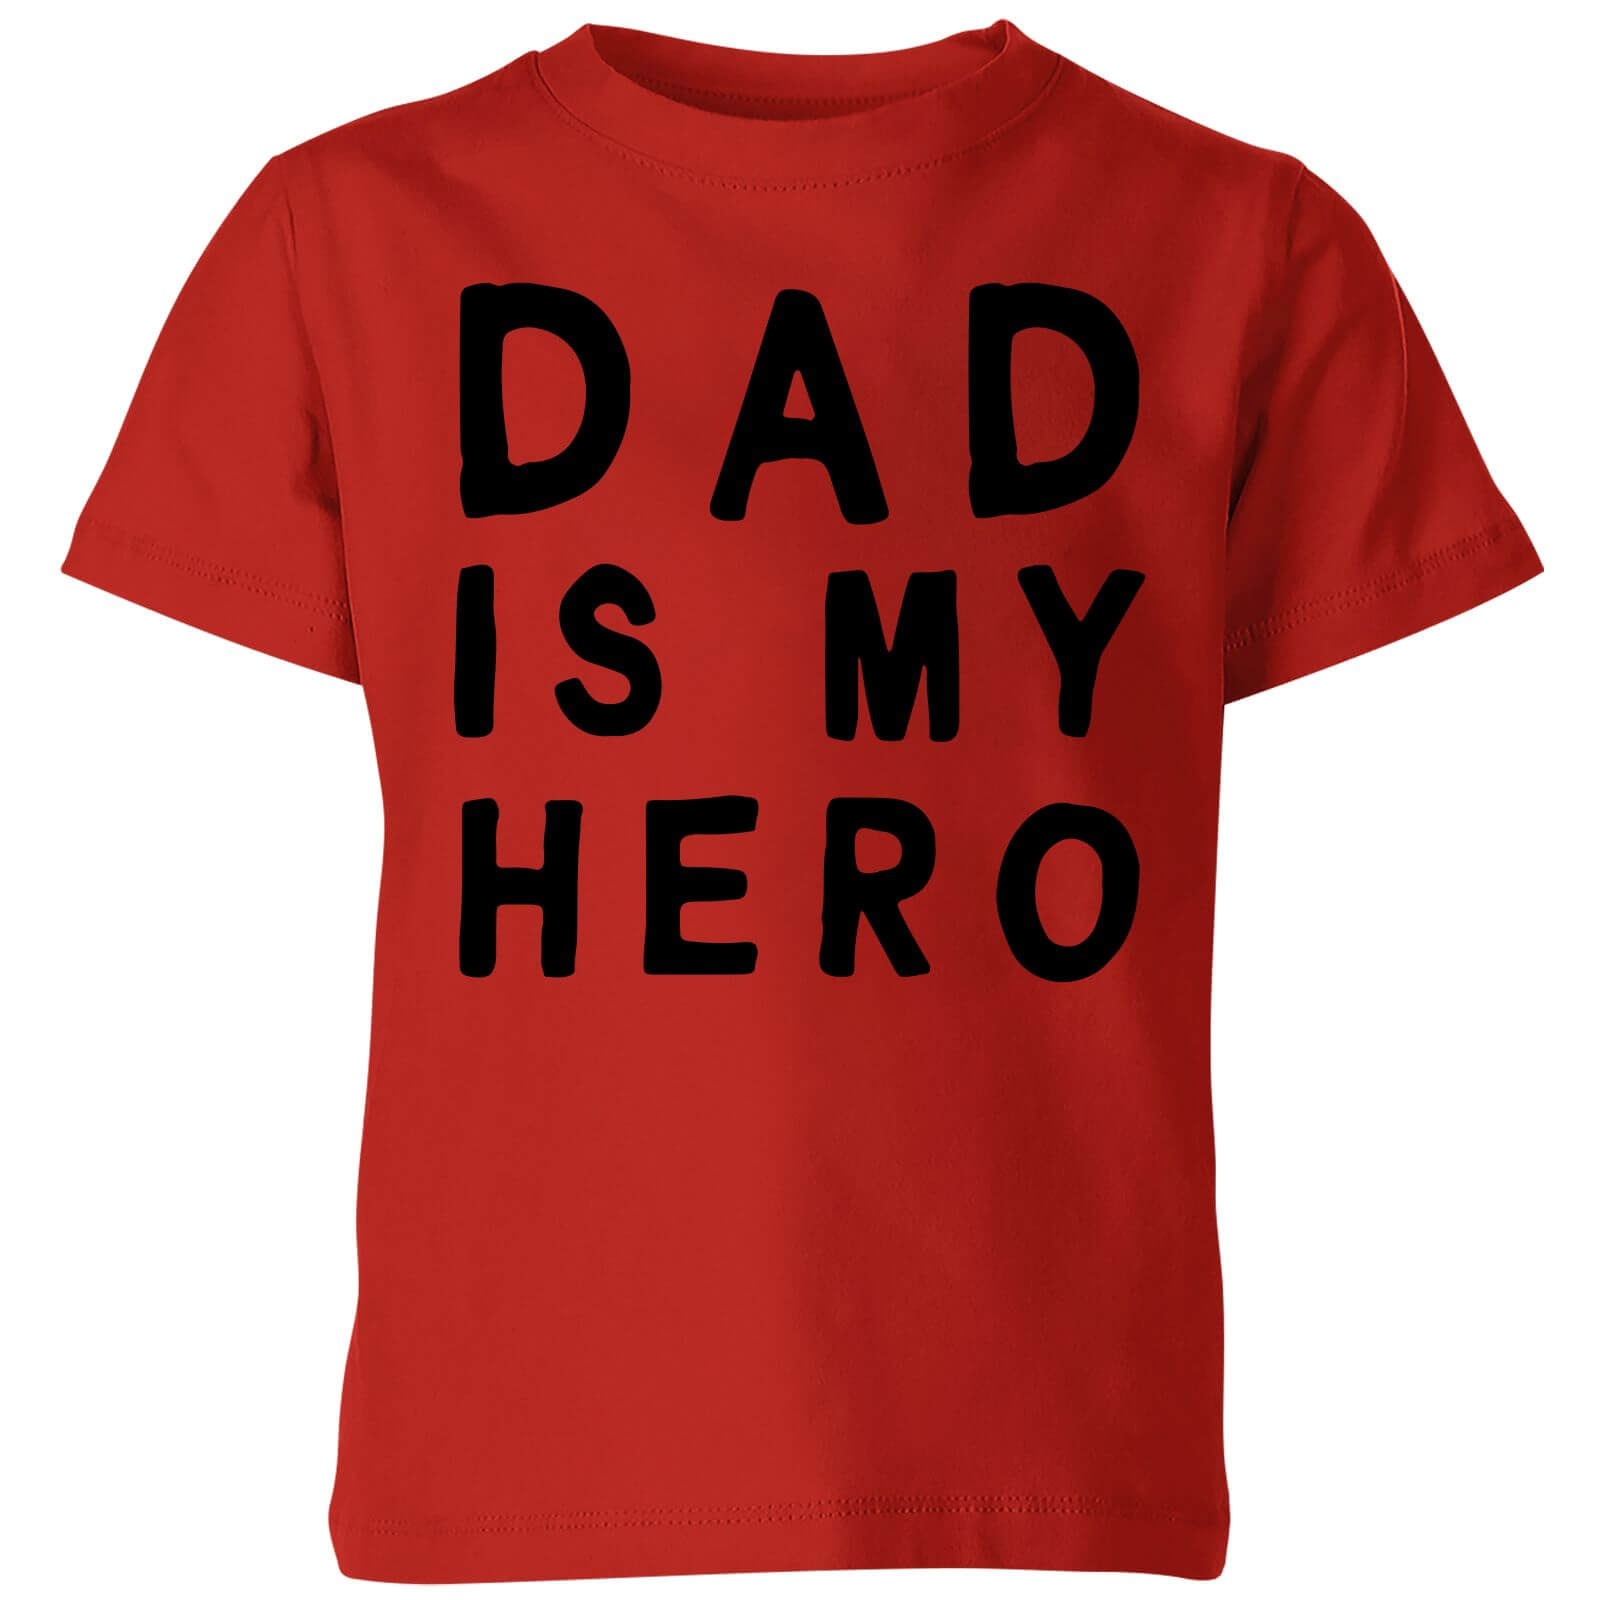 My Little Rascal Dad Is My Hero Kids' T-Shirt - Red - 5-6 Years - Red